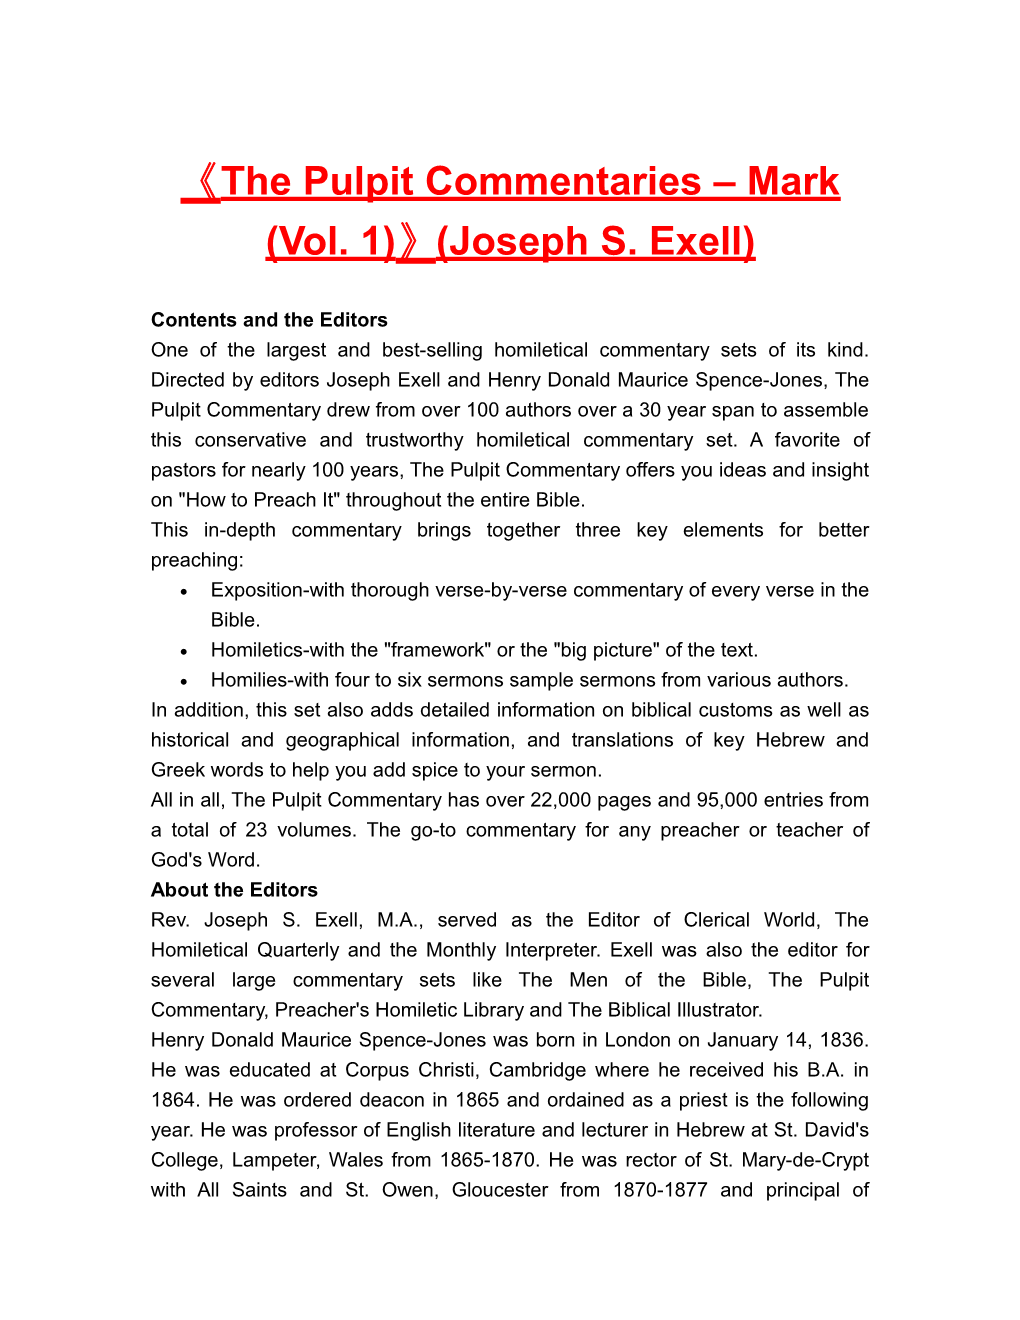 The Pulpit Commentaries Mark (Vol. 1) (Joseph S. Exell)